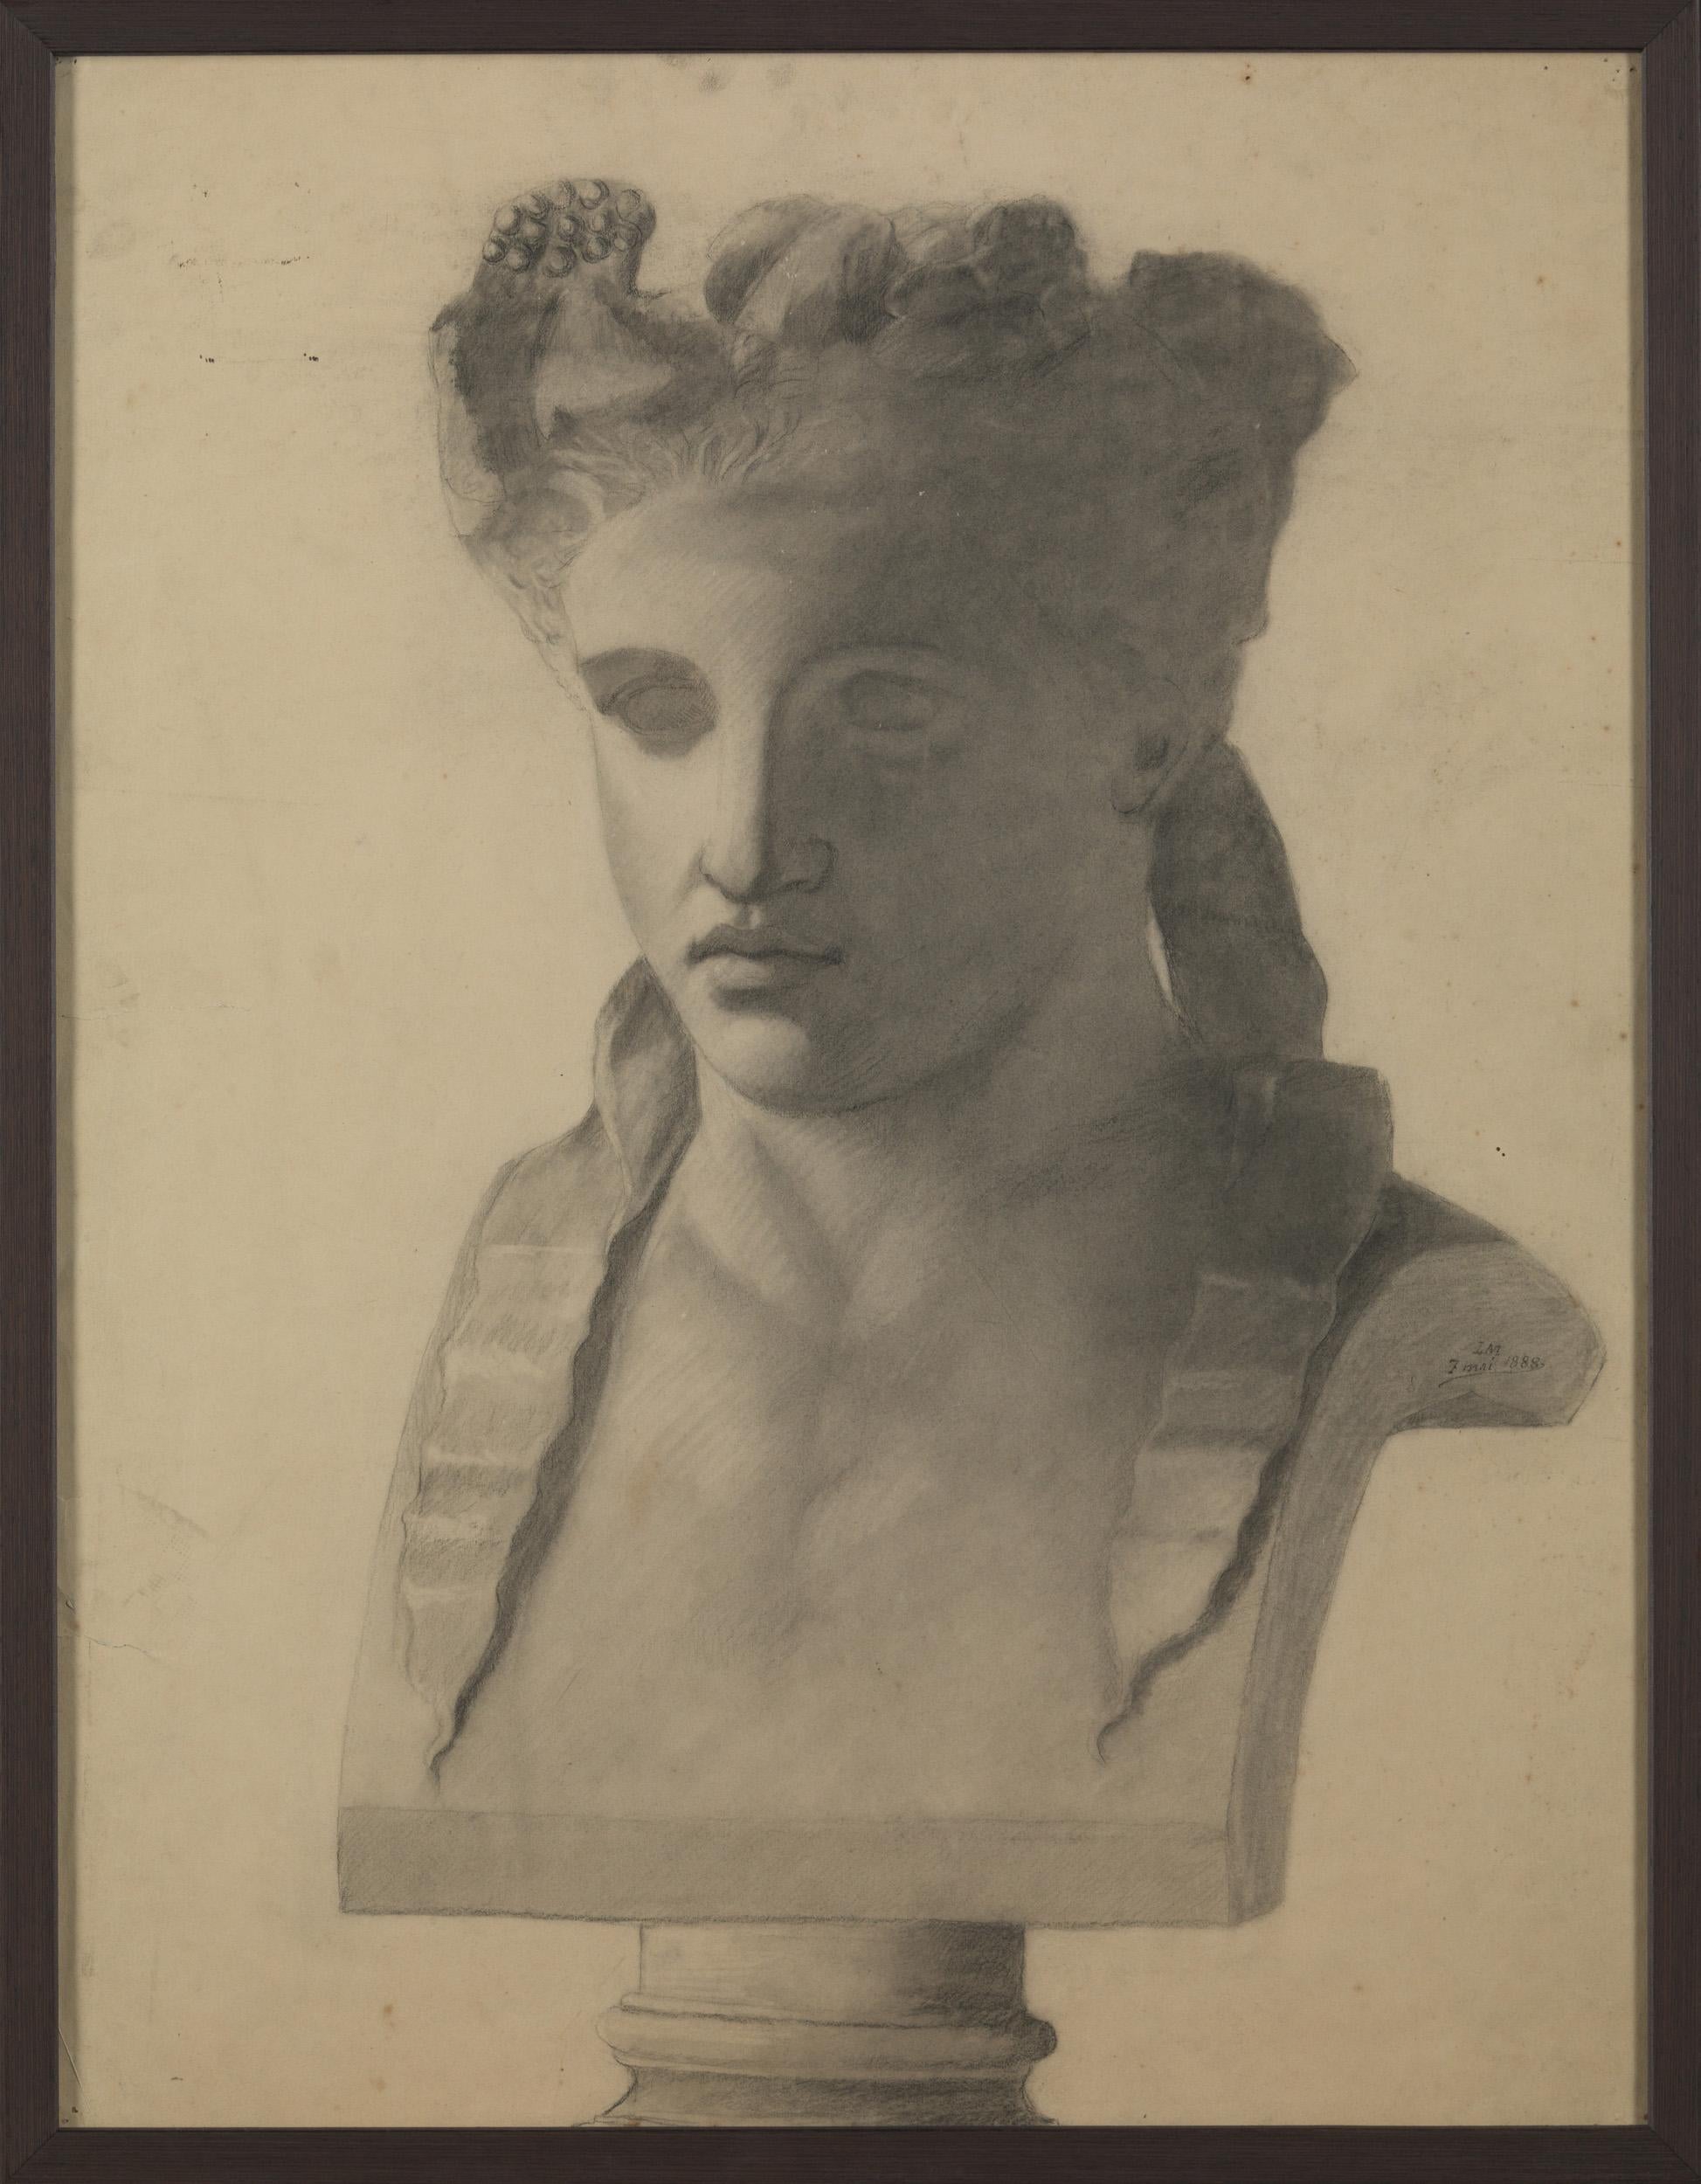 Unknown Academy Student 19th C Drawing, pencil on paper.